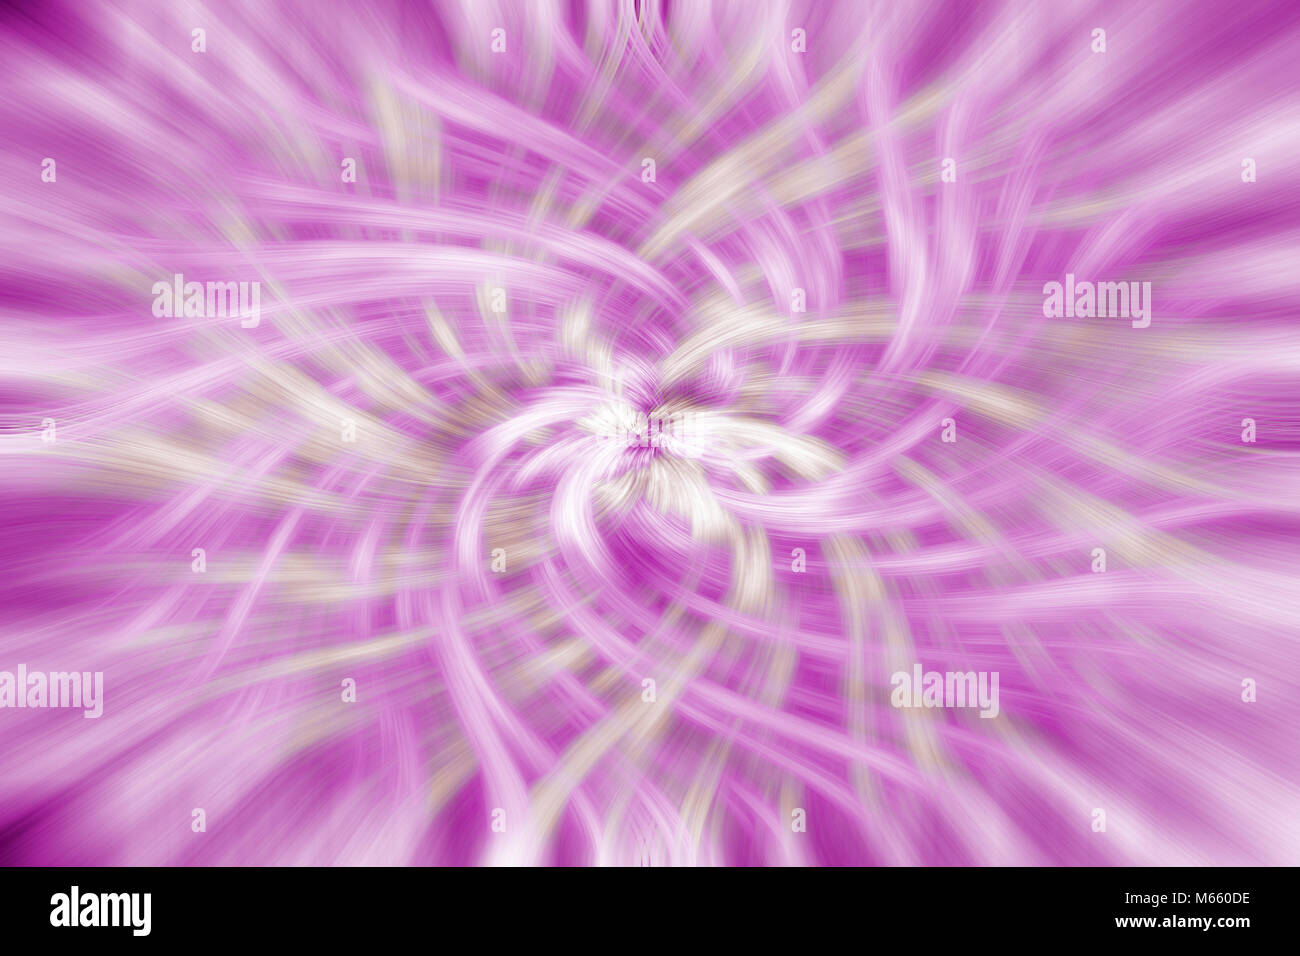 Colorful computer generated abstract pink background in floral shape Stock Photo